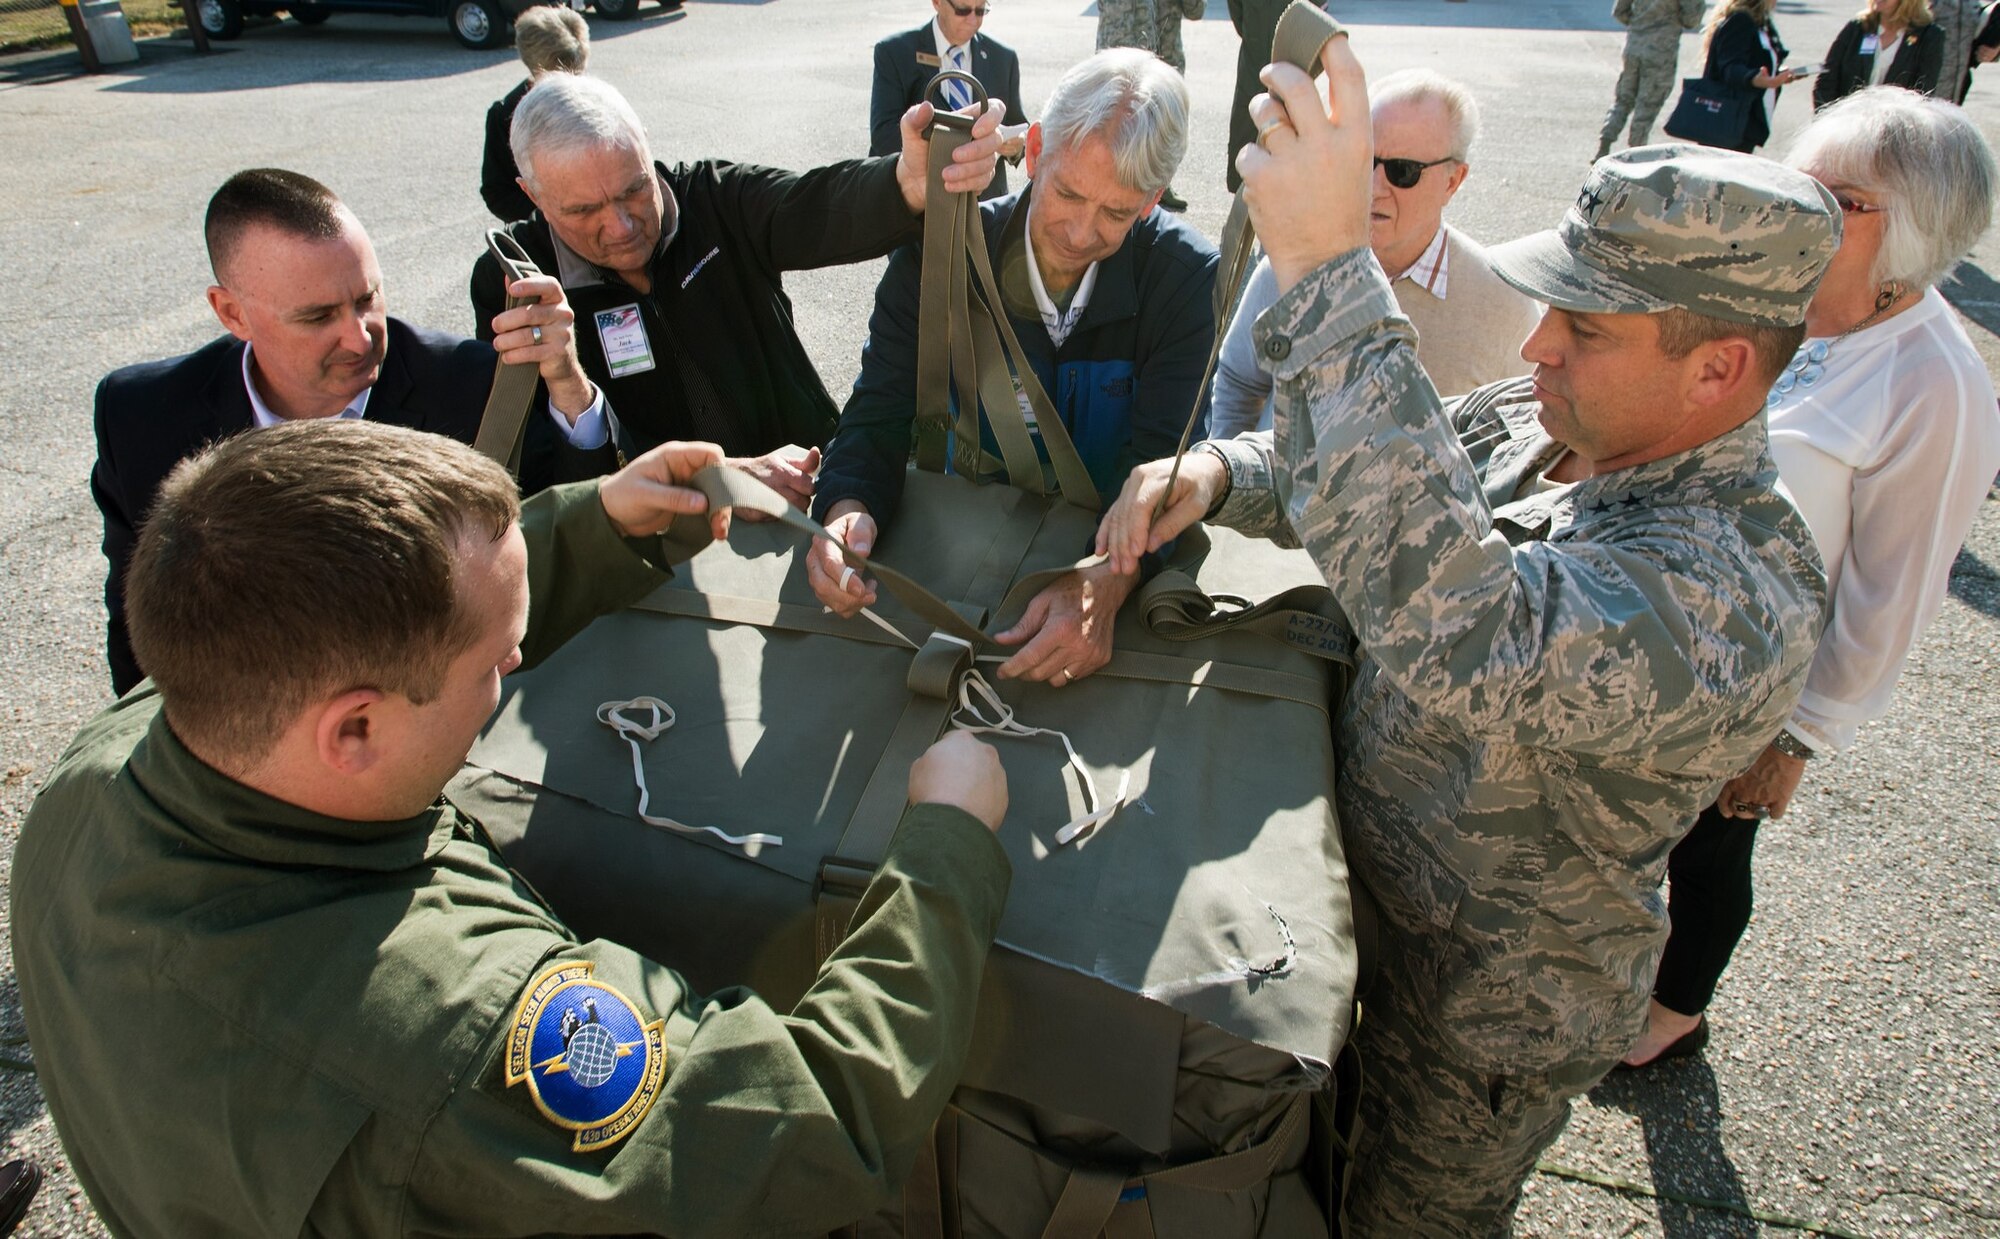 Maj. Gen. Thomas Sharpy, AMC vice commander, works with AMC civic leaders to build a Container Delivery System bundle, Nov. 16, 2016 during a civic leader tour at the 43rd Operations Support Squadron at Pope Army Airfield, N.C. The visit was part of the AMC civic leader tour of the AMC mission at Pope AAF.  The tour provided insight into AMC’s prominent role enabling joint mission effects globally. (U.S. Air Force photo by Marc Barnes)